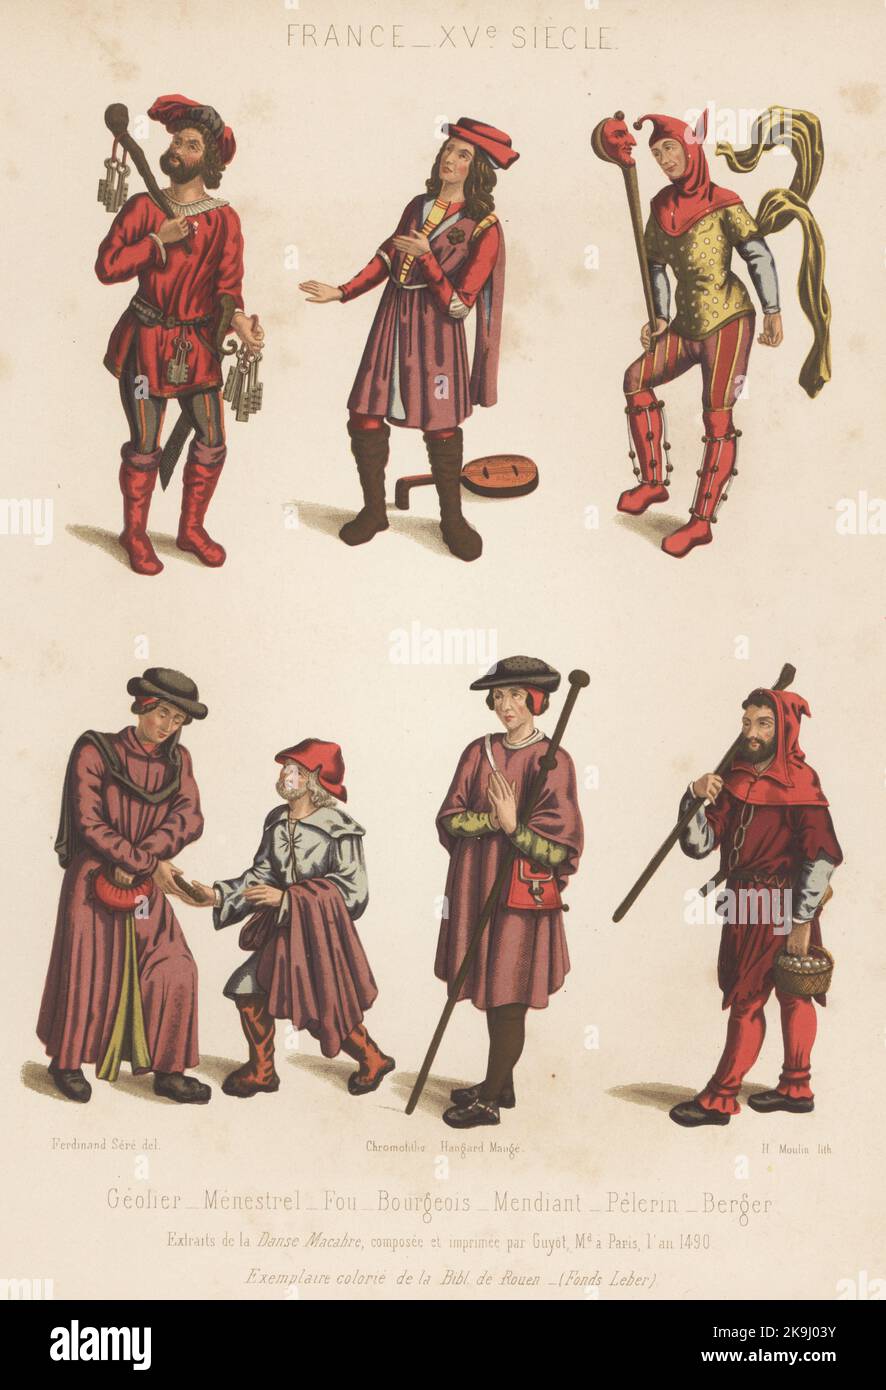 French costumes, 15th century. Gaoler, minstrel, fool, bourgeois, beggar, pilgrim and shepherd. Geolier, menestrel, fou, bourgeois, mendiant, pelerin, berger. XVe siecle. Taken from La Danse Macabre, composed and printed by Guyot, Paris, 1490. Chromolithograph by H. Moulin after an illustration by Ferdinand Sere from Charles Louandre’s Les Arts Somptuaires, The Sumptuary Arts, Hangard-Mauge, Paris, 1858. Stock Photo